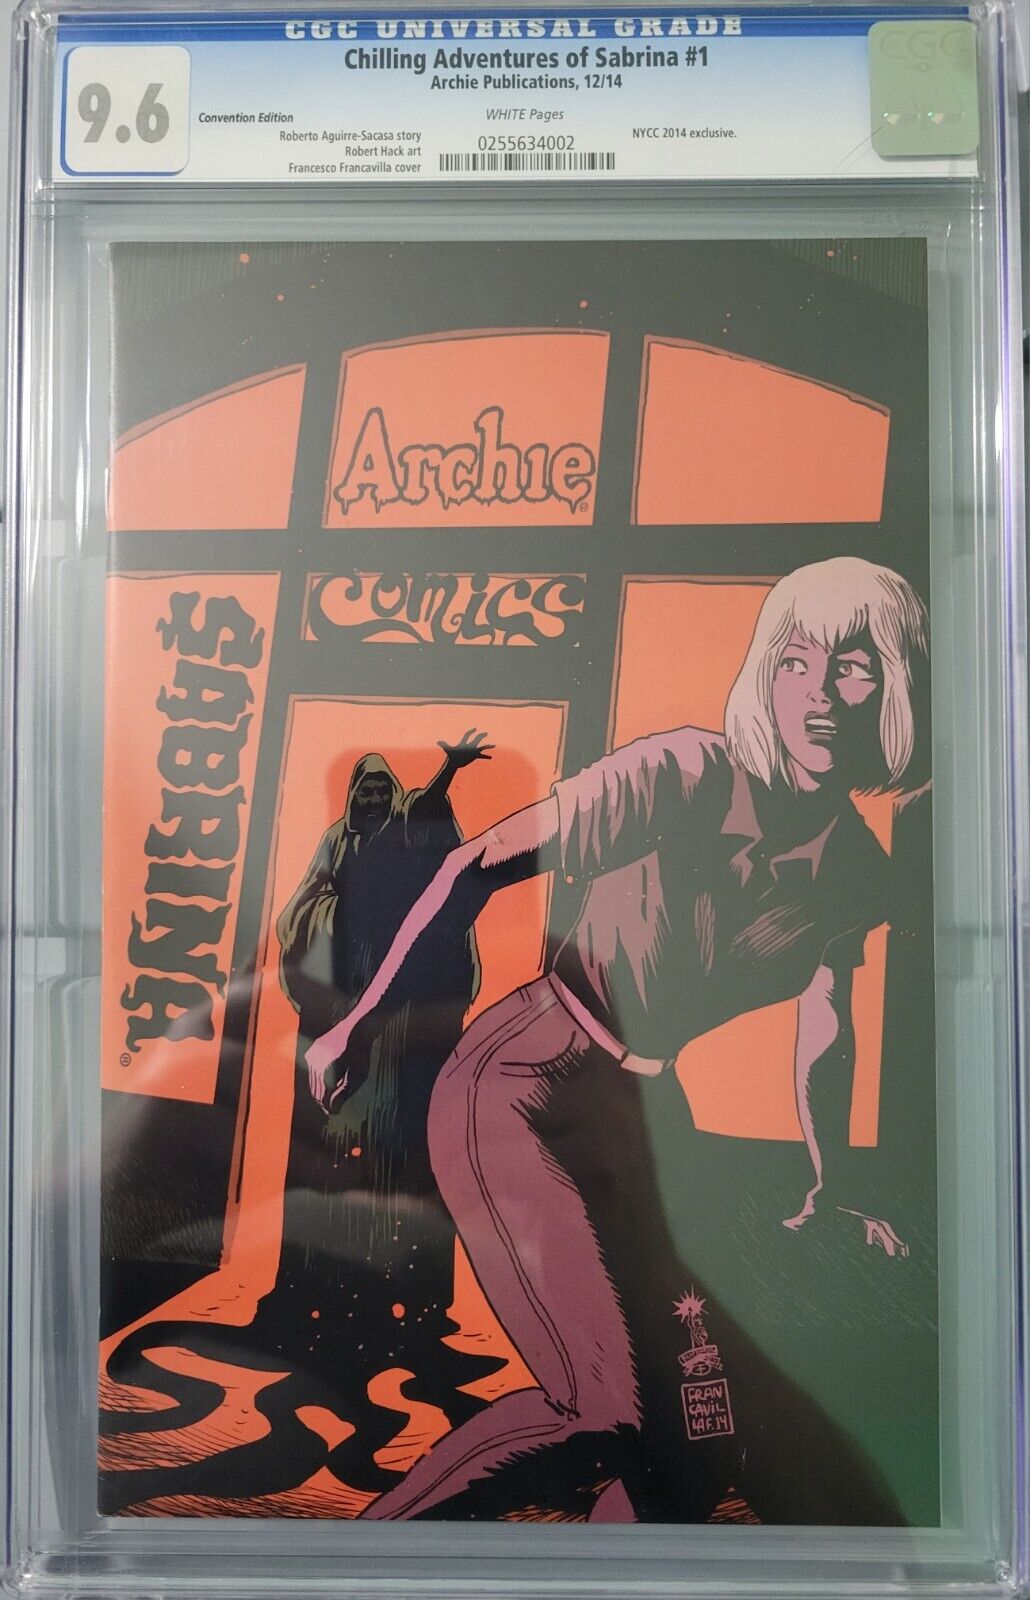 Chilling Adventures of Sabrina #1 CGC 9.6 NYCC 2014 Convention Edition